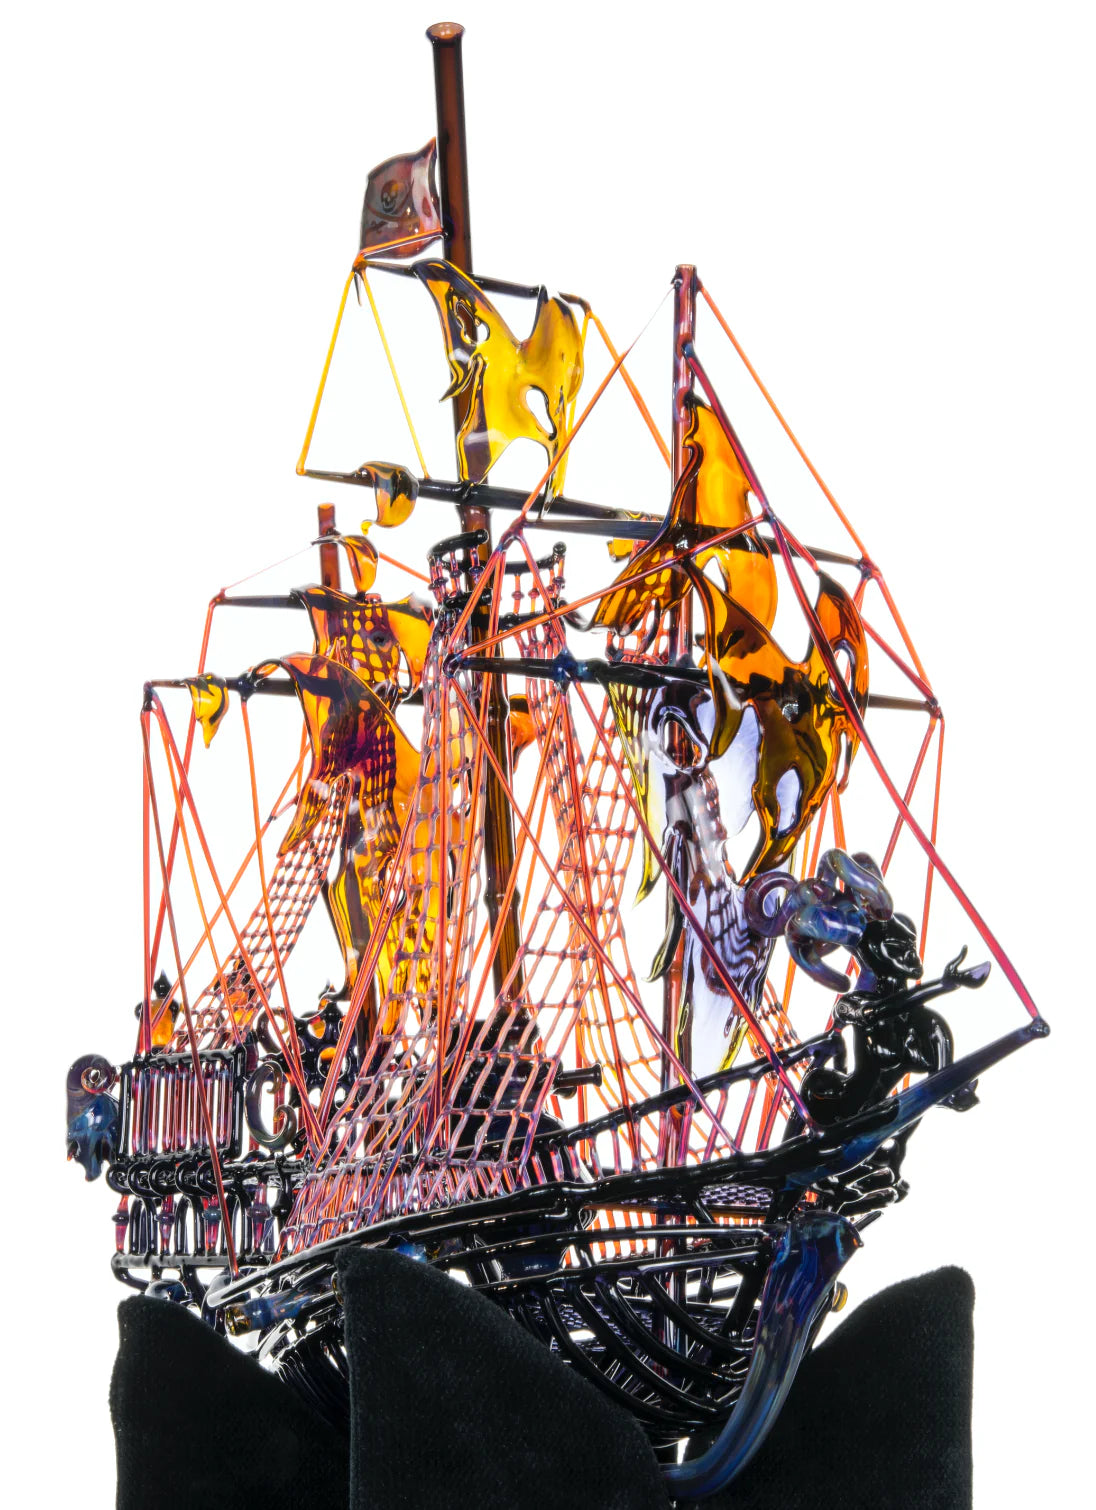 The Pirate Ship by Buck, Lace Face and Joe O’Connell